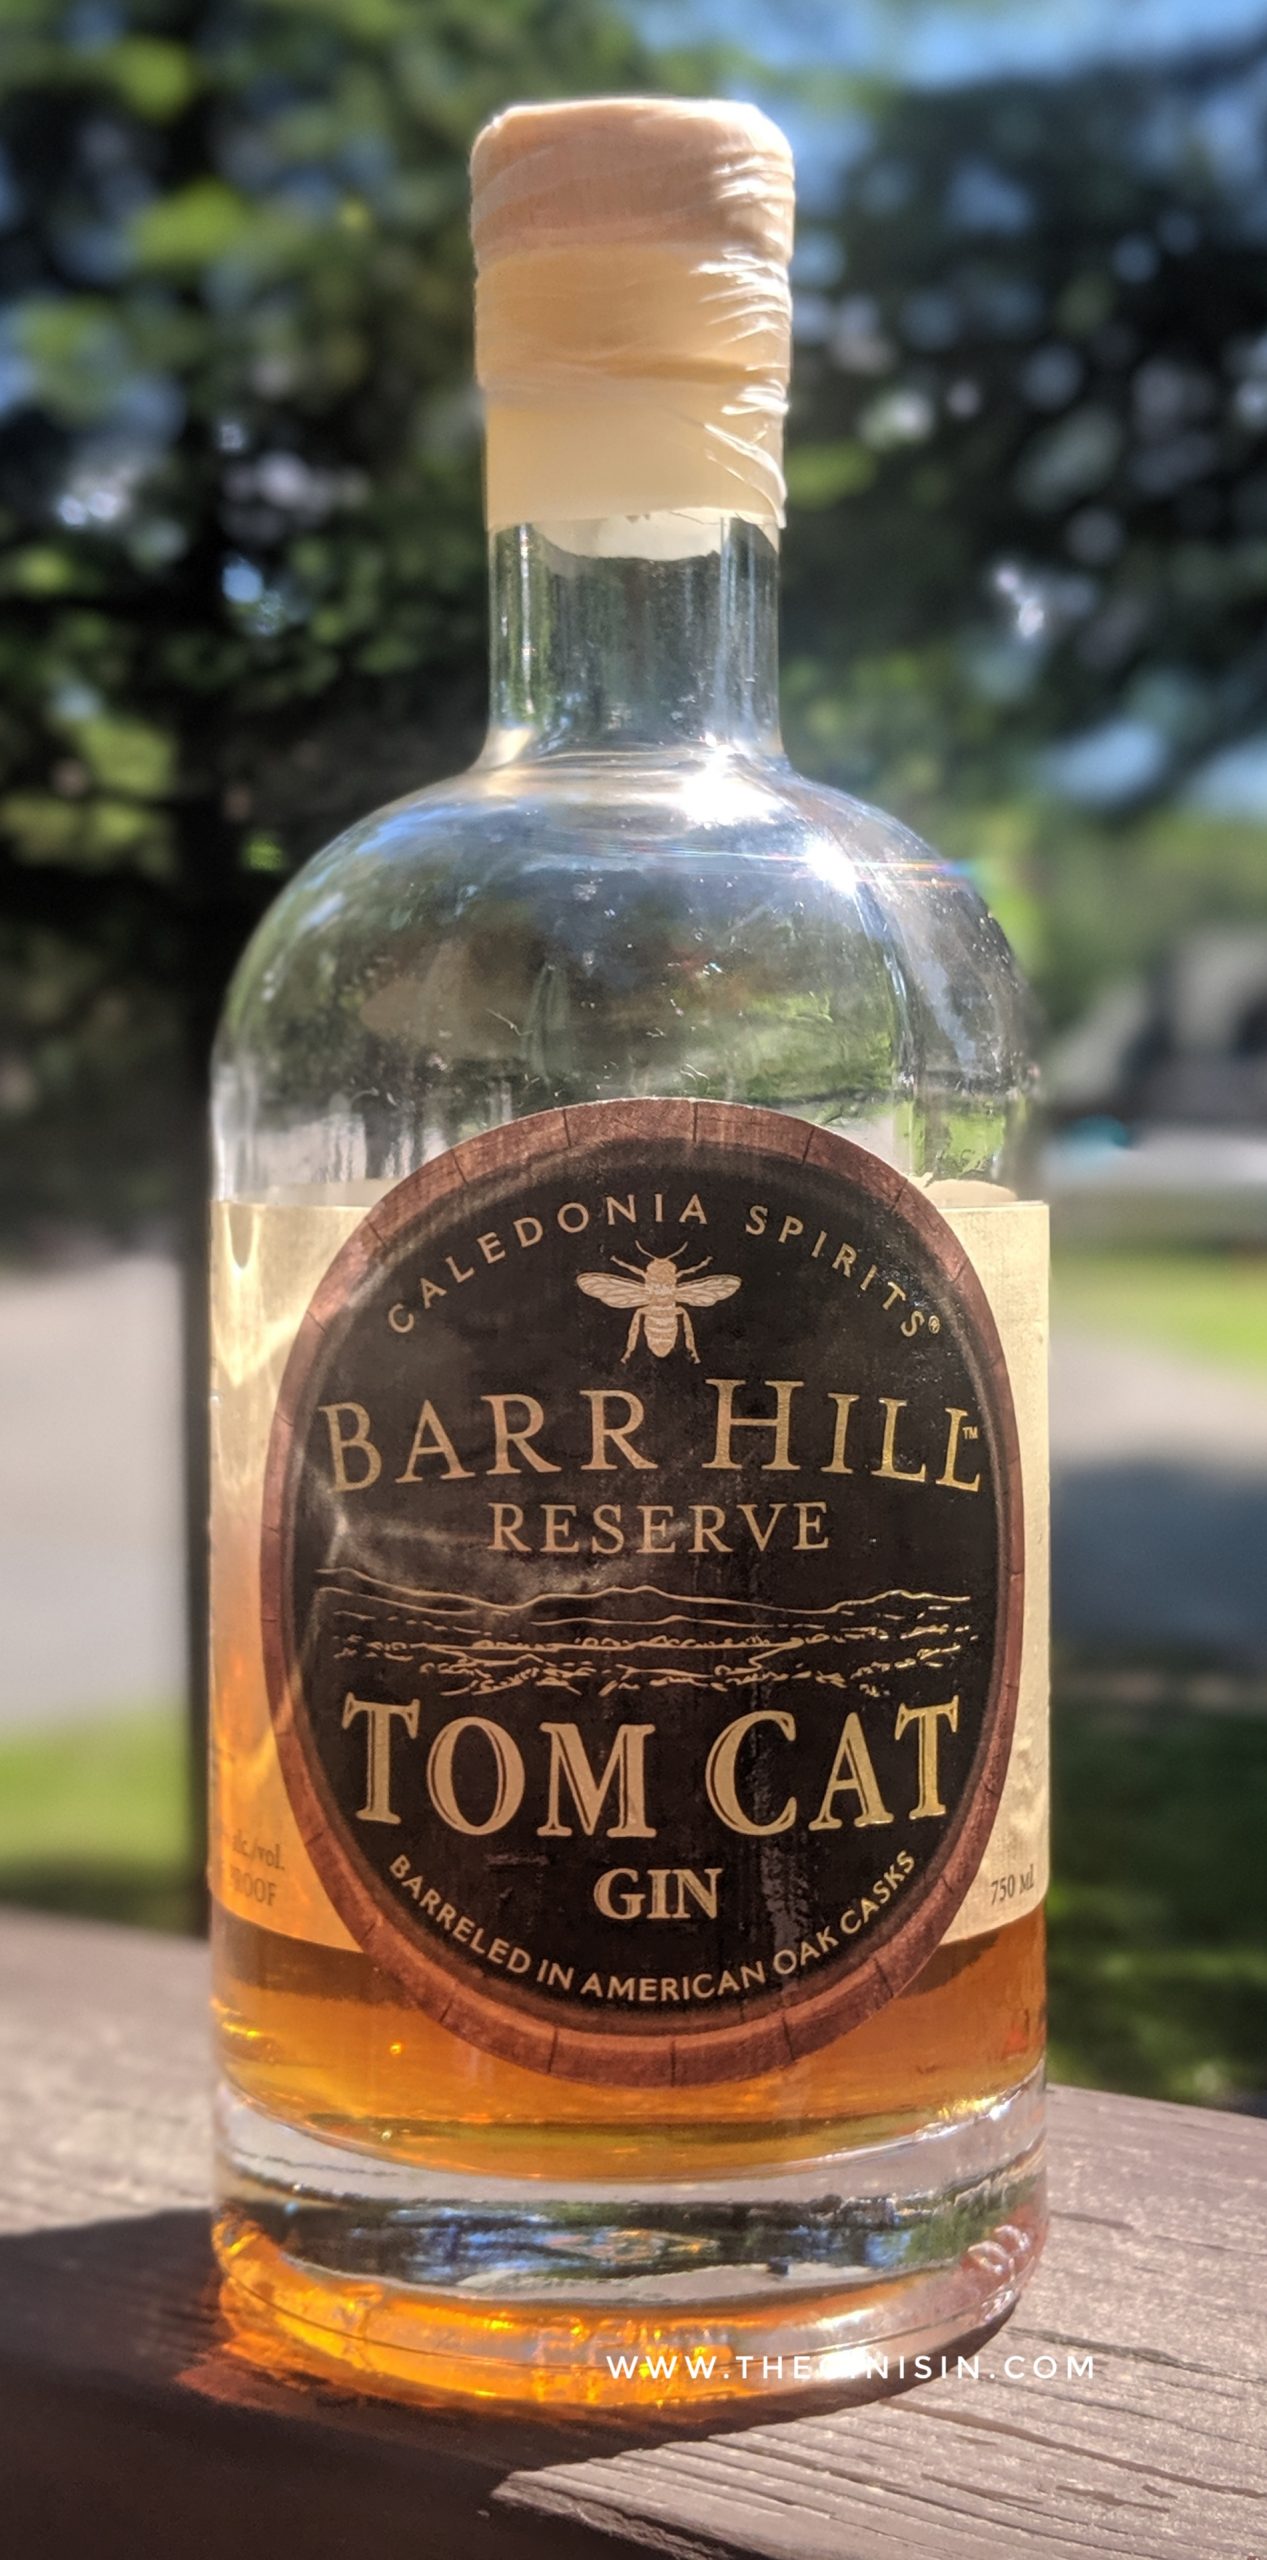 15 HQ Pictures Tom Cat Gin : Barr Hill Tom Cat Barrel Aged Gin - Blueprint Brands